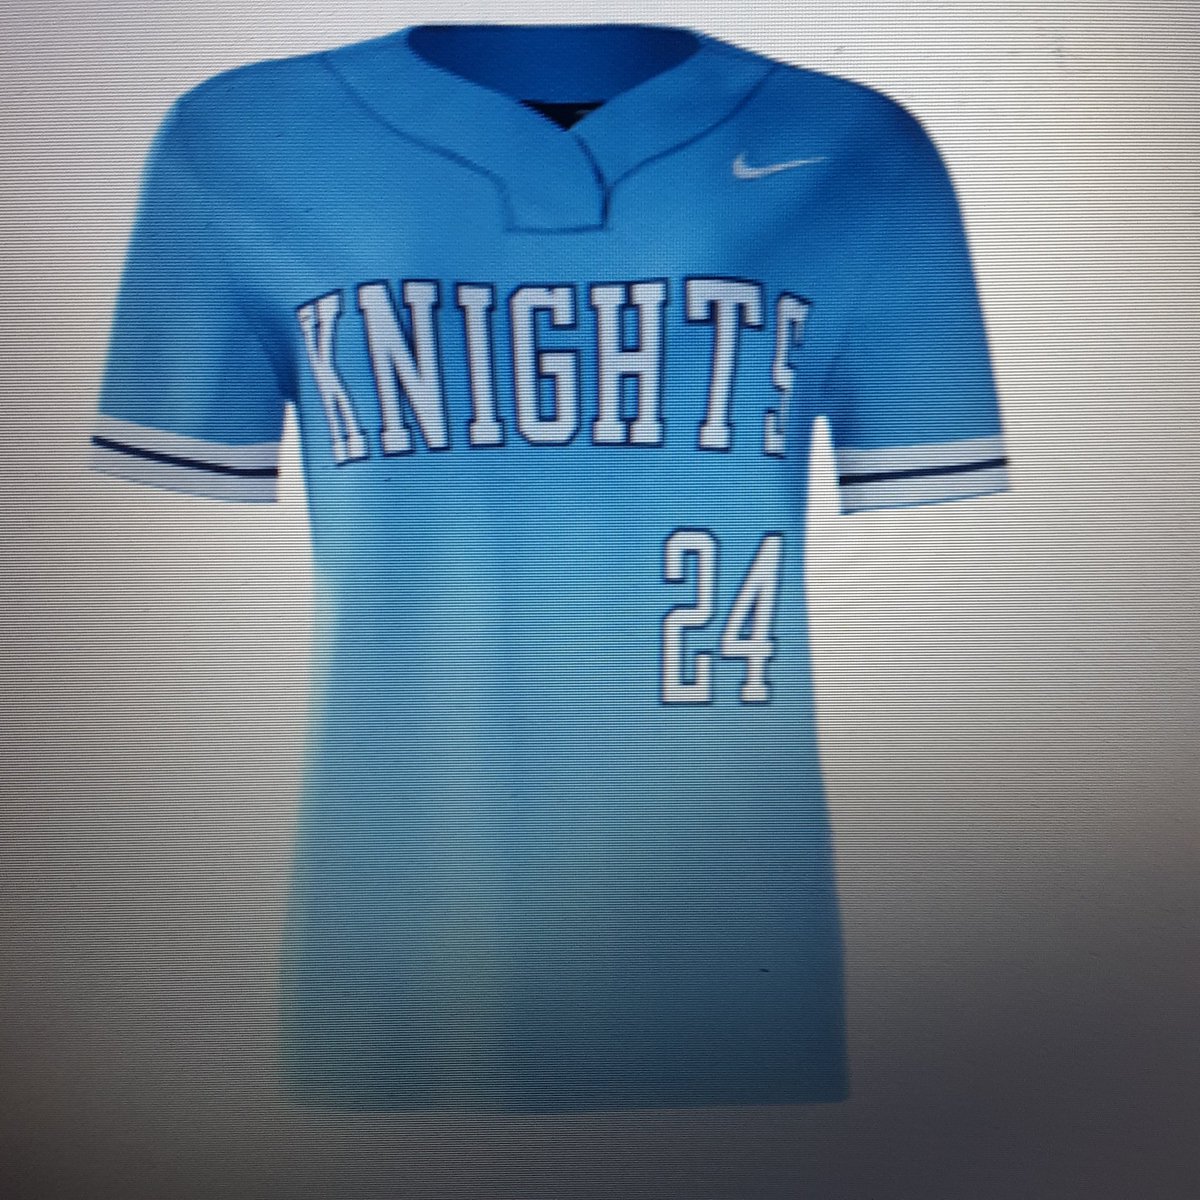 NPsoftball #Team22 Today's workout canceled Next workout Thursday 315 to 515 Next week: Workouts Monday and Wednesday 300 to 515 Monday: Knights Navy vs. Knights Columbia game. #Tradition #Attitude #Runthetable